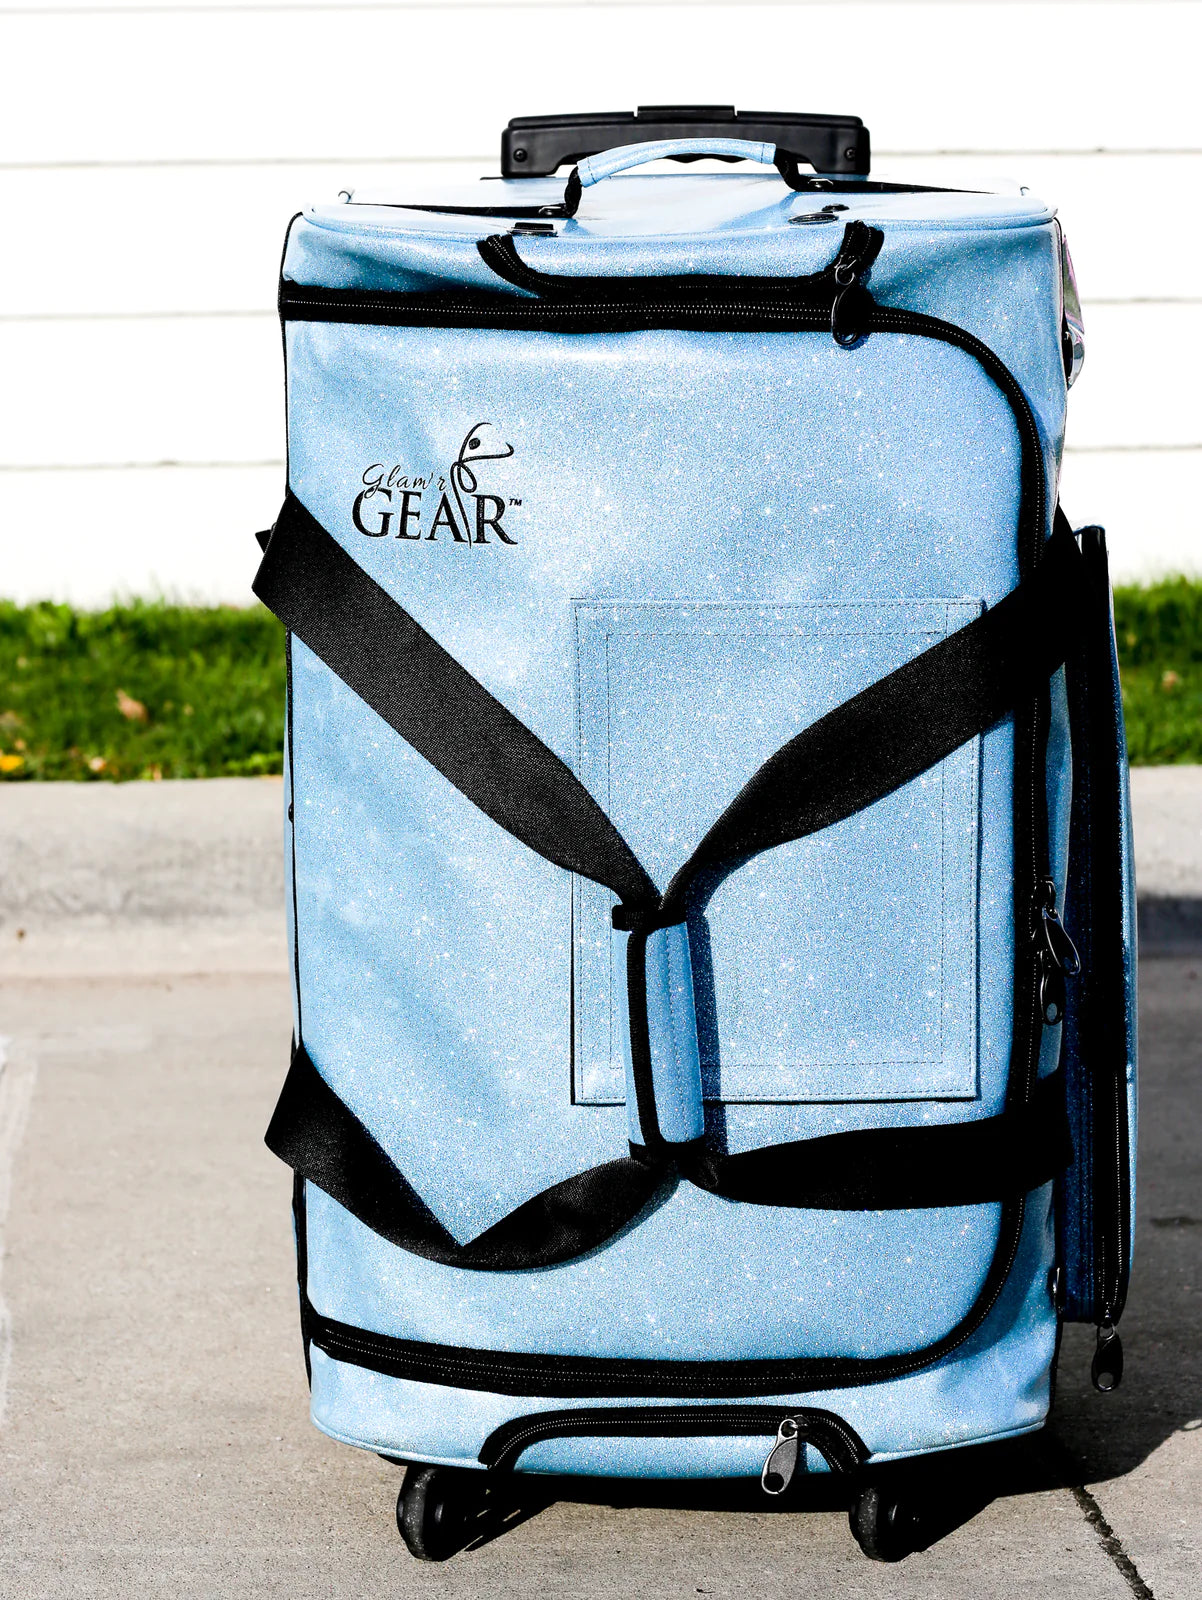 Glam'r Gear Standard Size Bag with Built-In uHide Rack